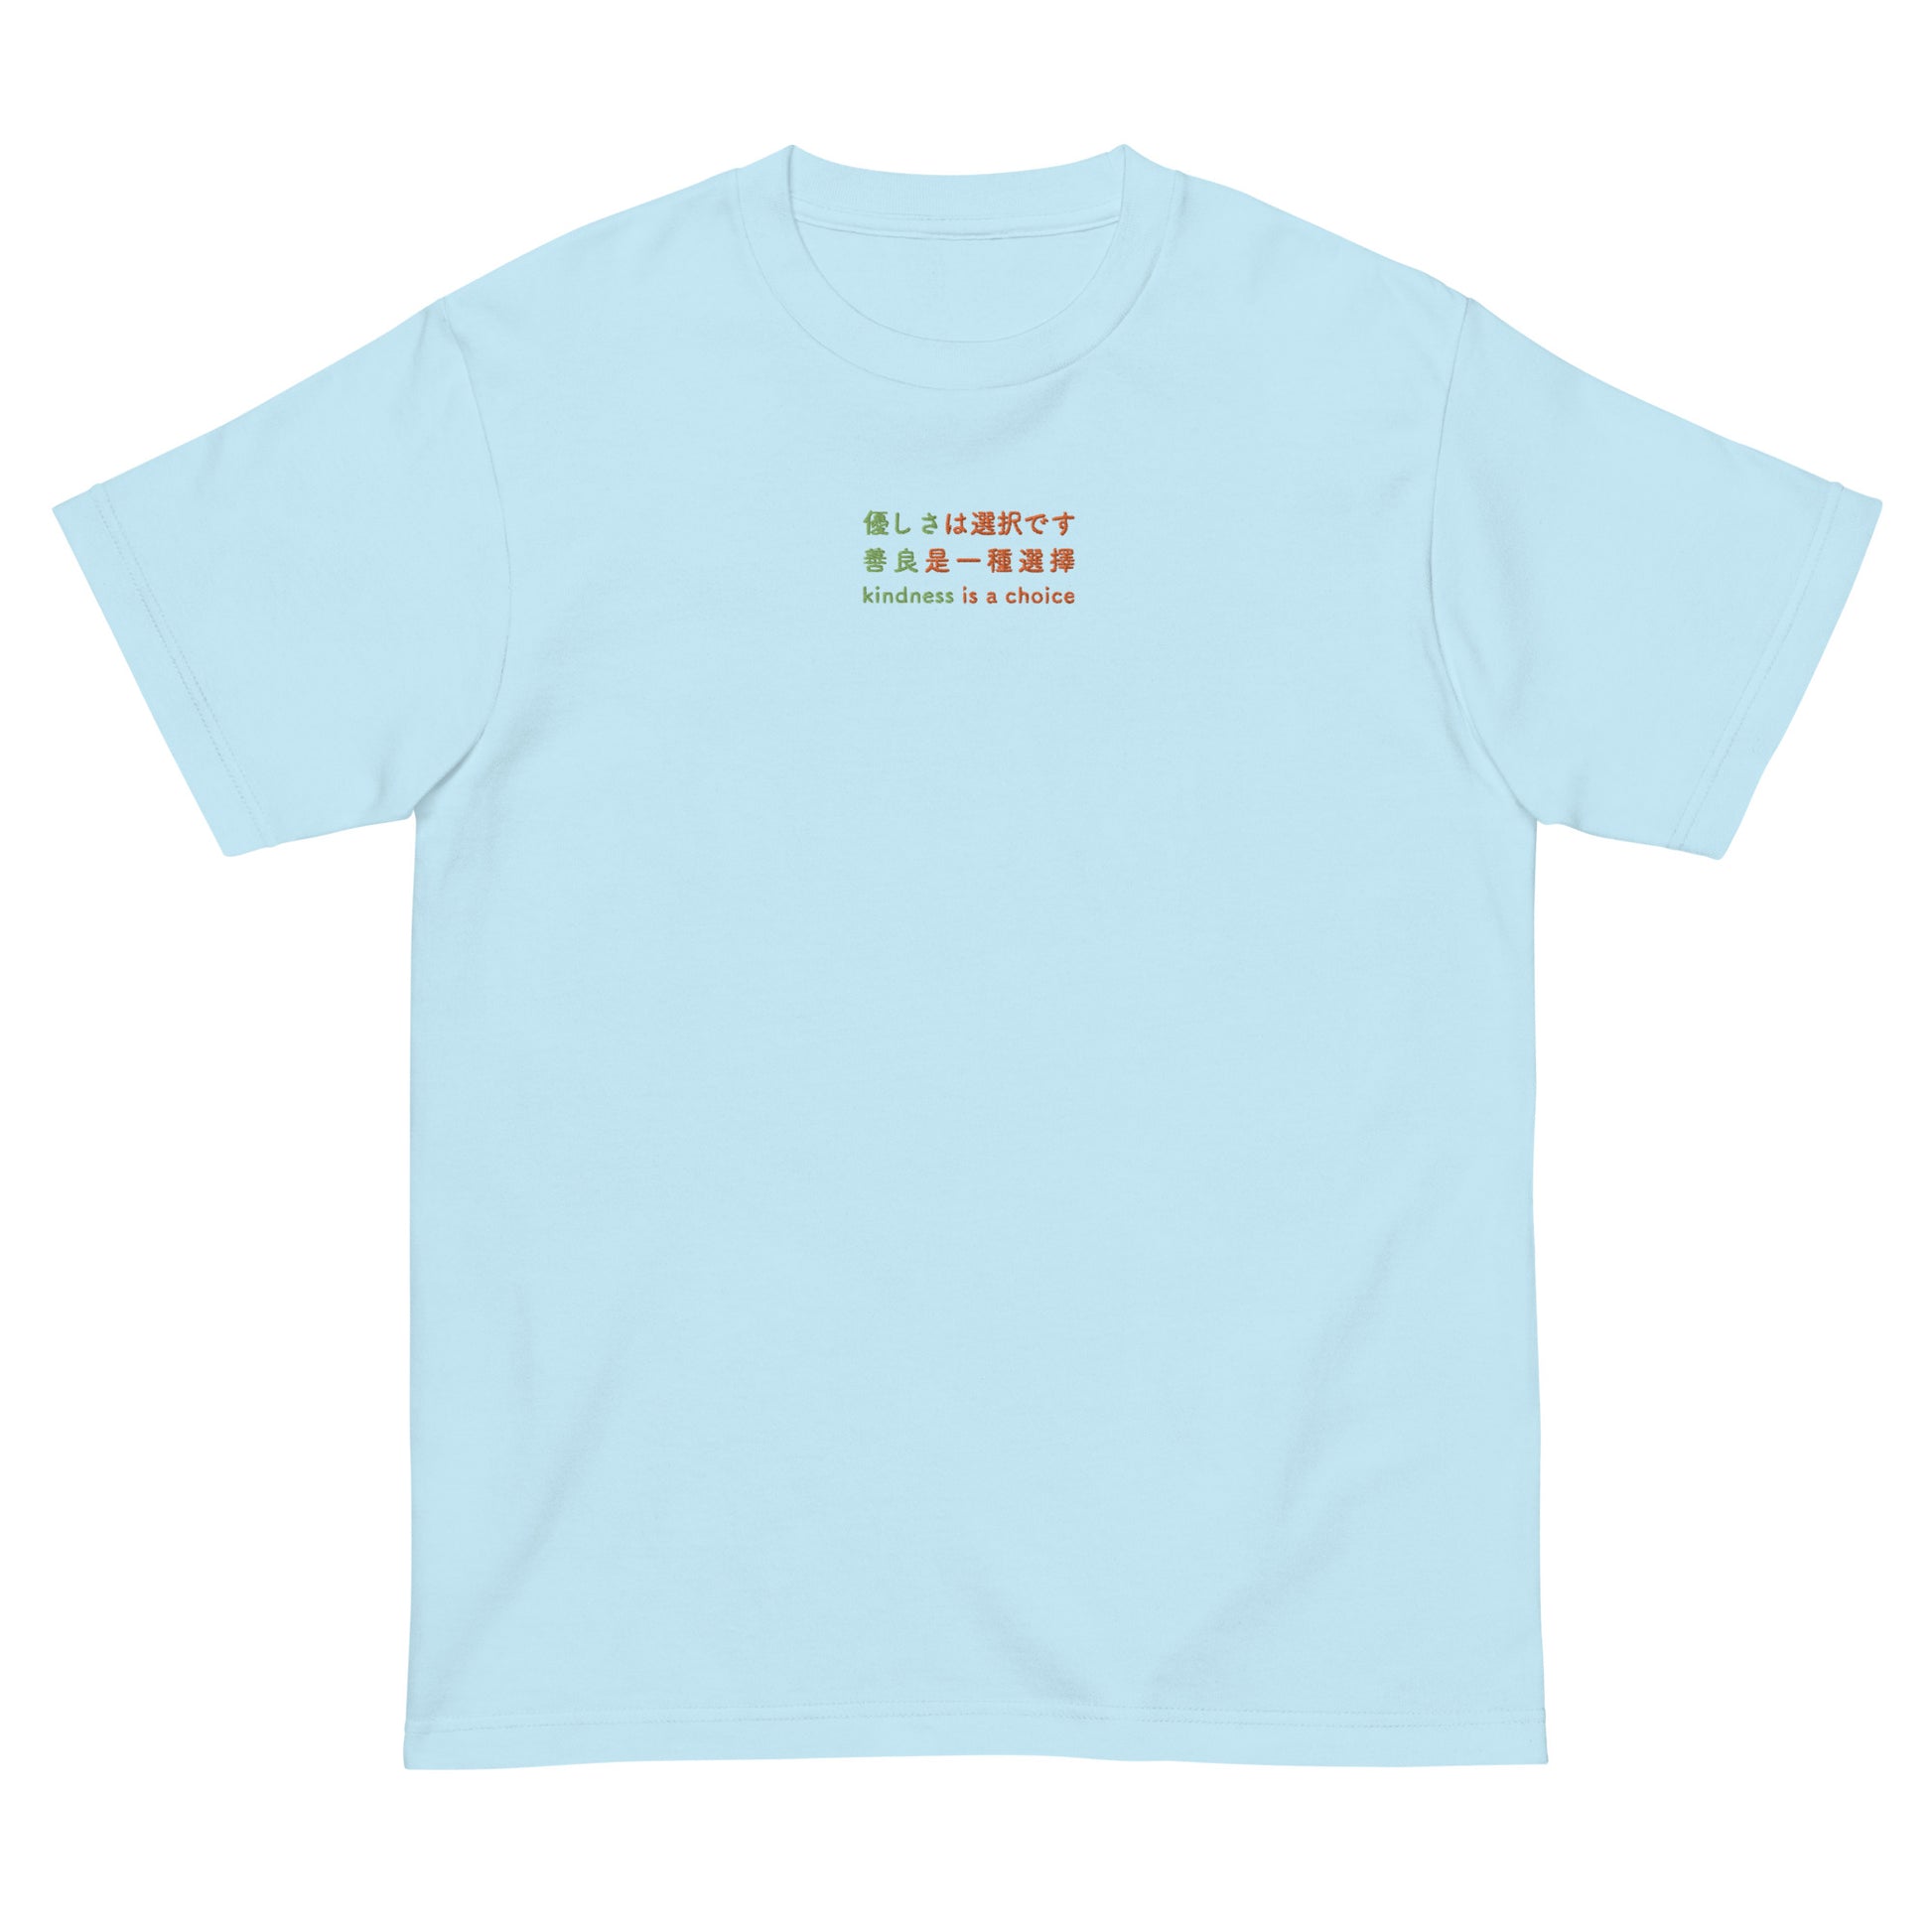 Light Blue High Quality Tee - Front Design with an Green, Orange Embroidery "Kindness is a Choice" in Japanese,Chinese and English